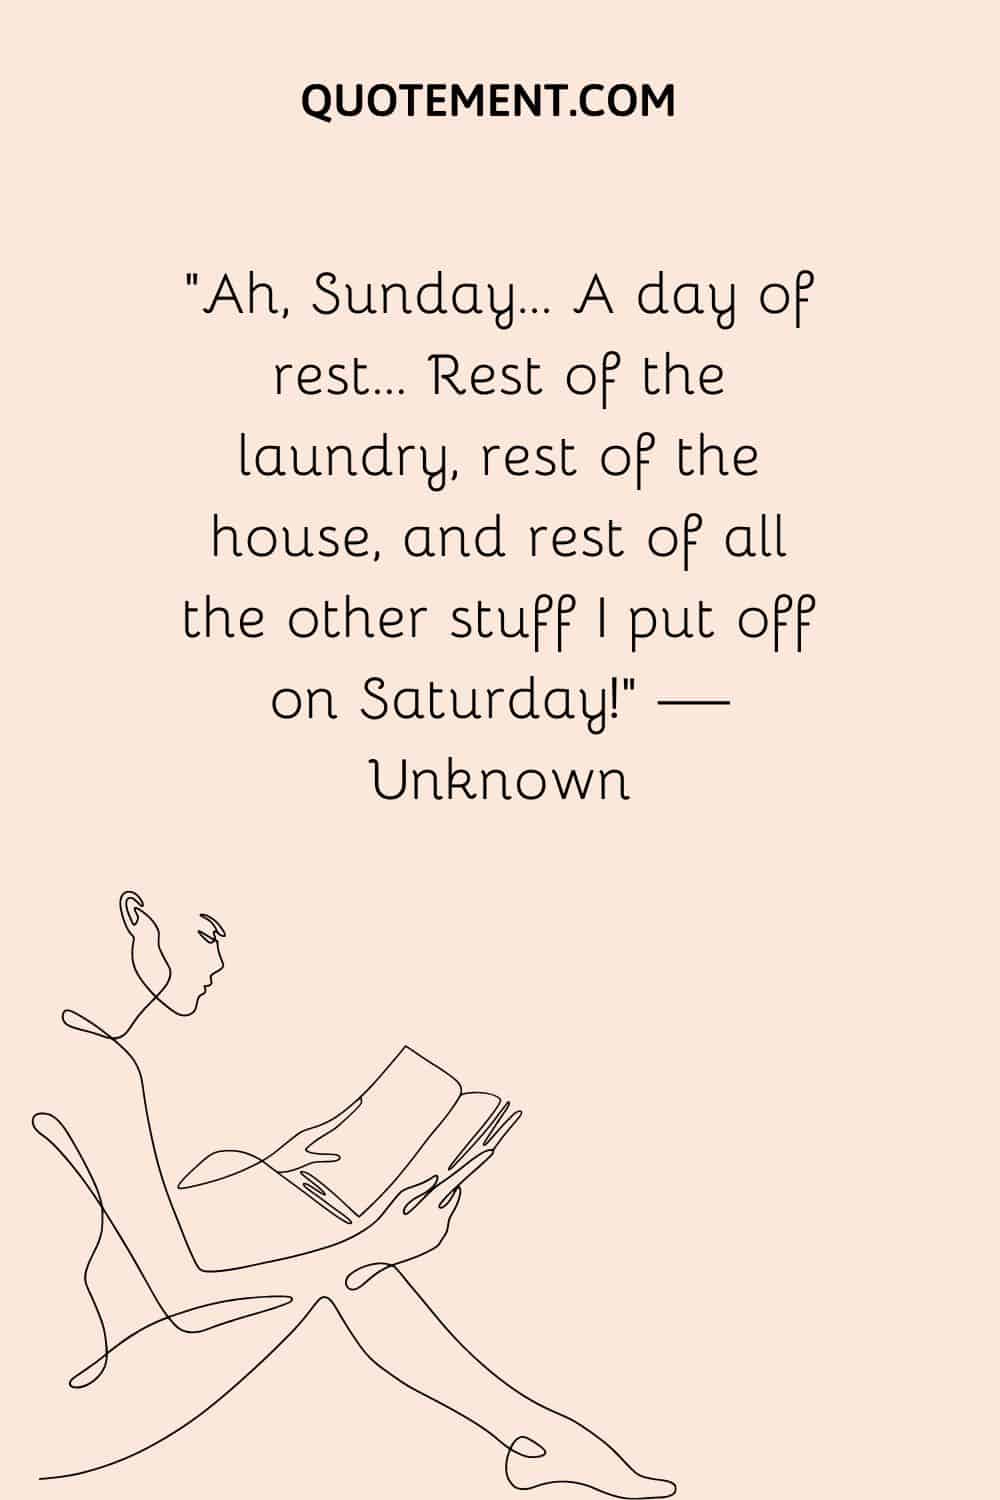 “Ah, Sunday… A day of rest… Rest of the laundry, rest of the house, and rest of all the other stuff I put off on Saturday!” — Unknown